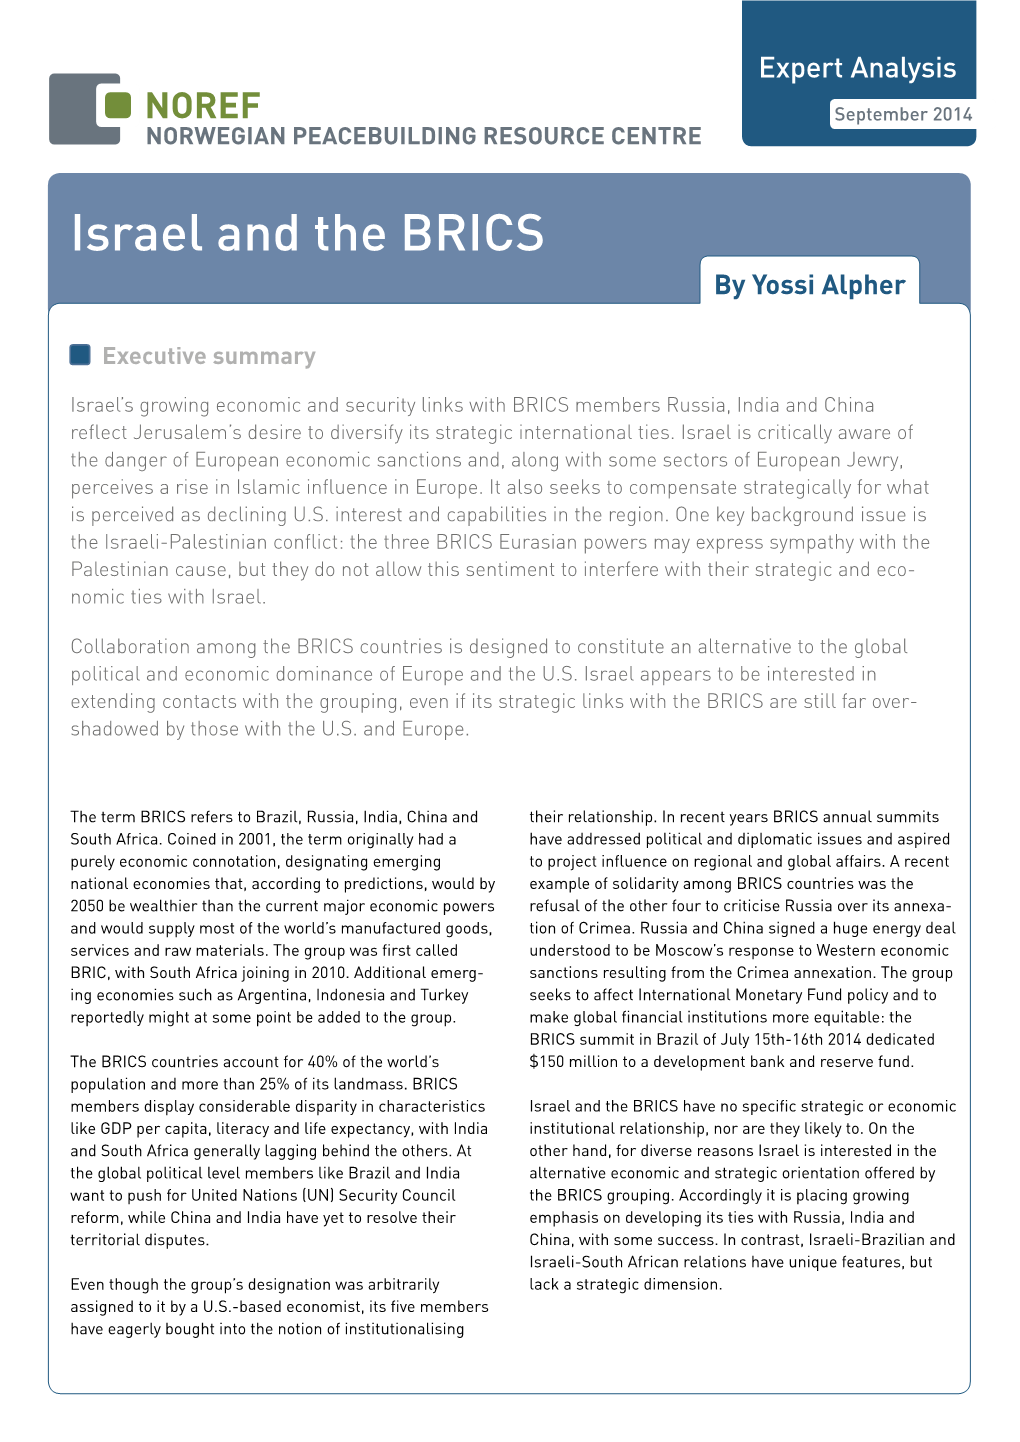 Israel and the BRICS by Yossi Alpher